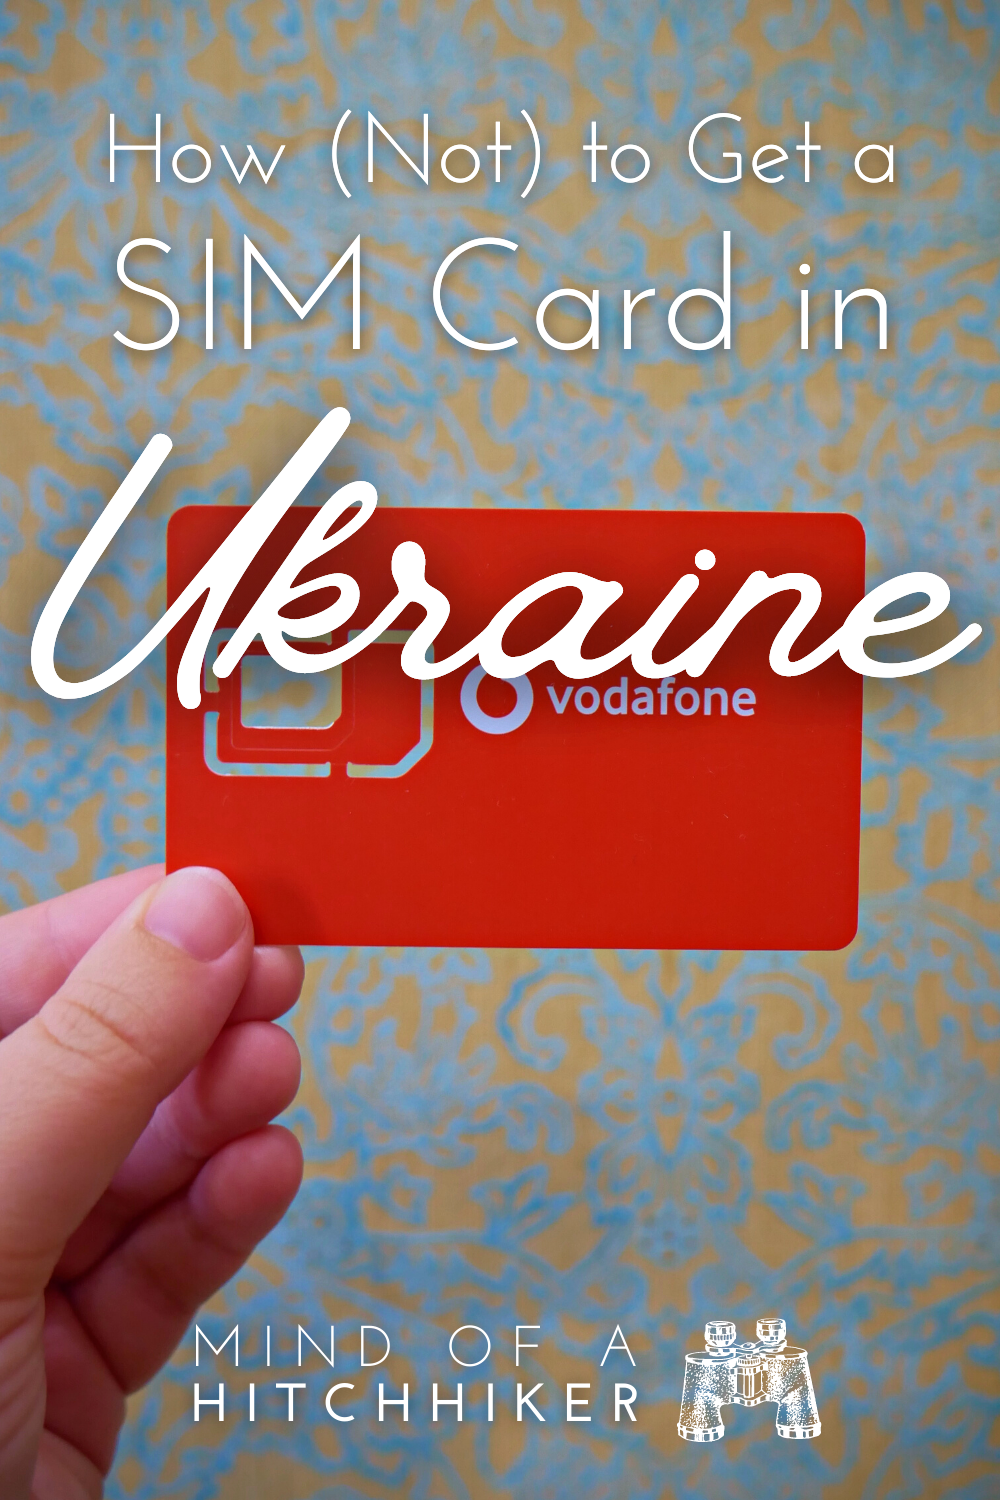 how to not get a sim card in kyiv ukraine